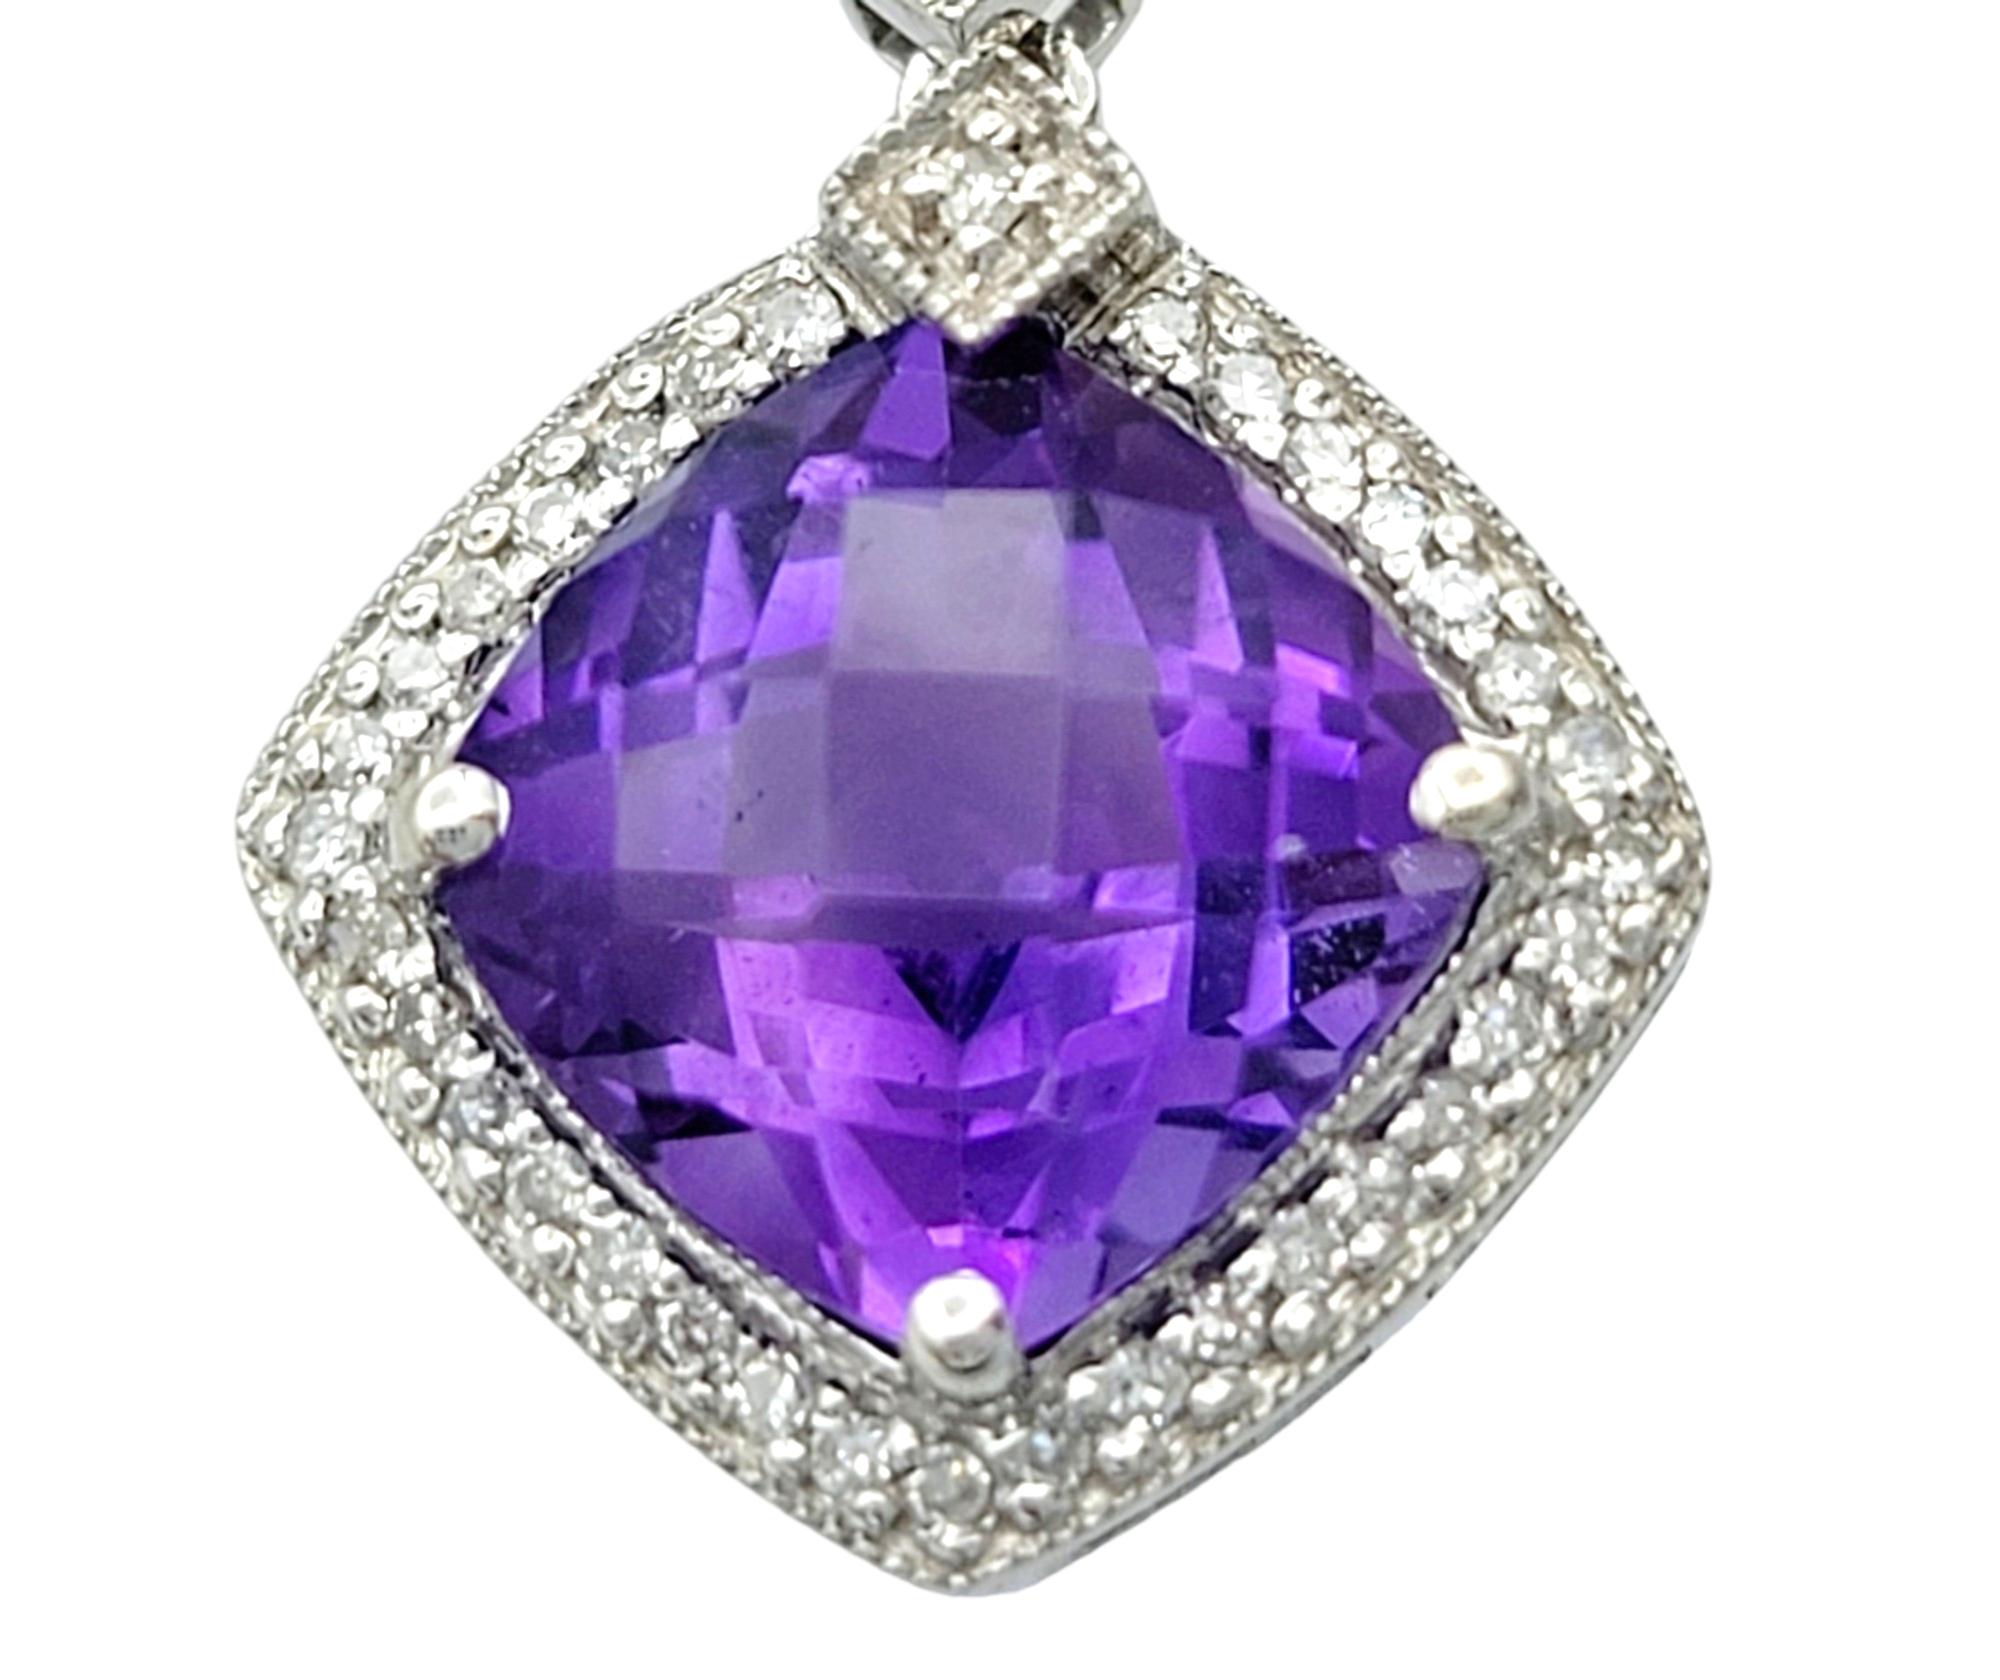 These gorgeous earrings, set in elegant 14 karat white gold, showcase a sophisticated and harmonious design. The central feature in each earring is a cushion-cut amethyst, exuding a rich purple hue. Surrounding the amethyst is a sparkling halo of